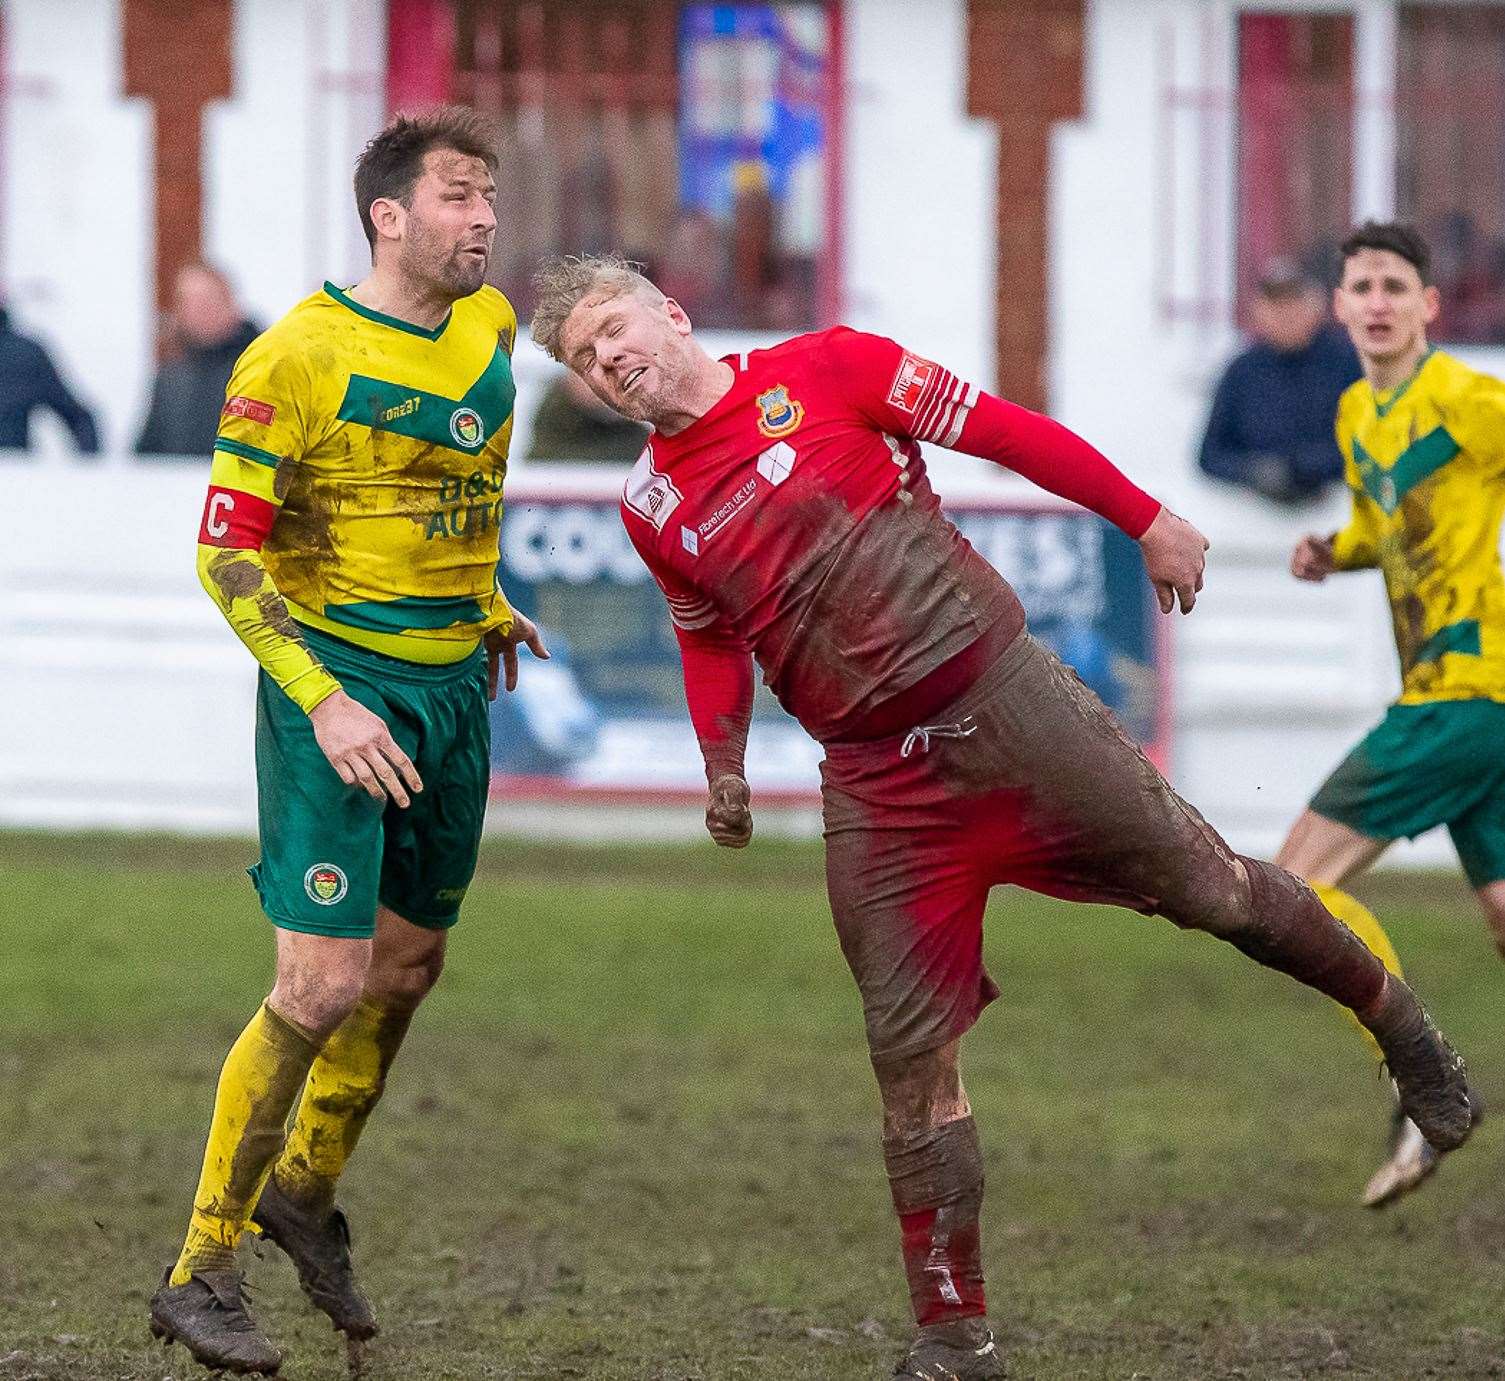 Whitstable's Harry Goodger contests for the ball with Ashford's Liam Friend. Picture: Les Biggs